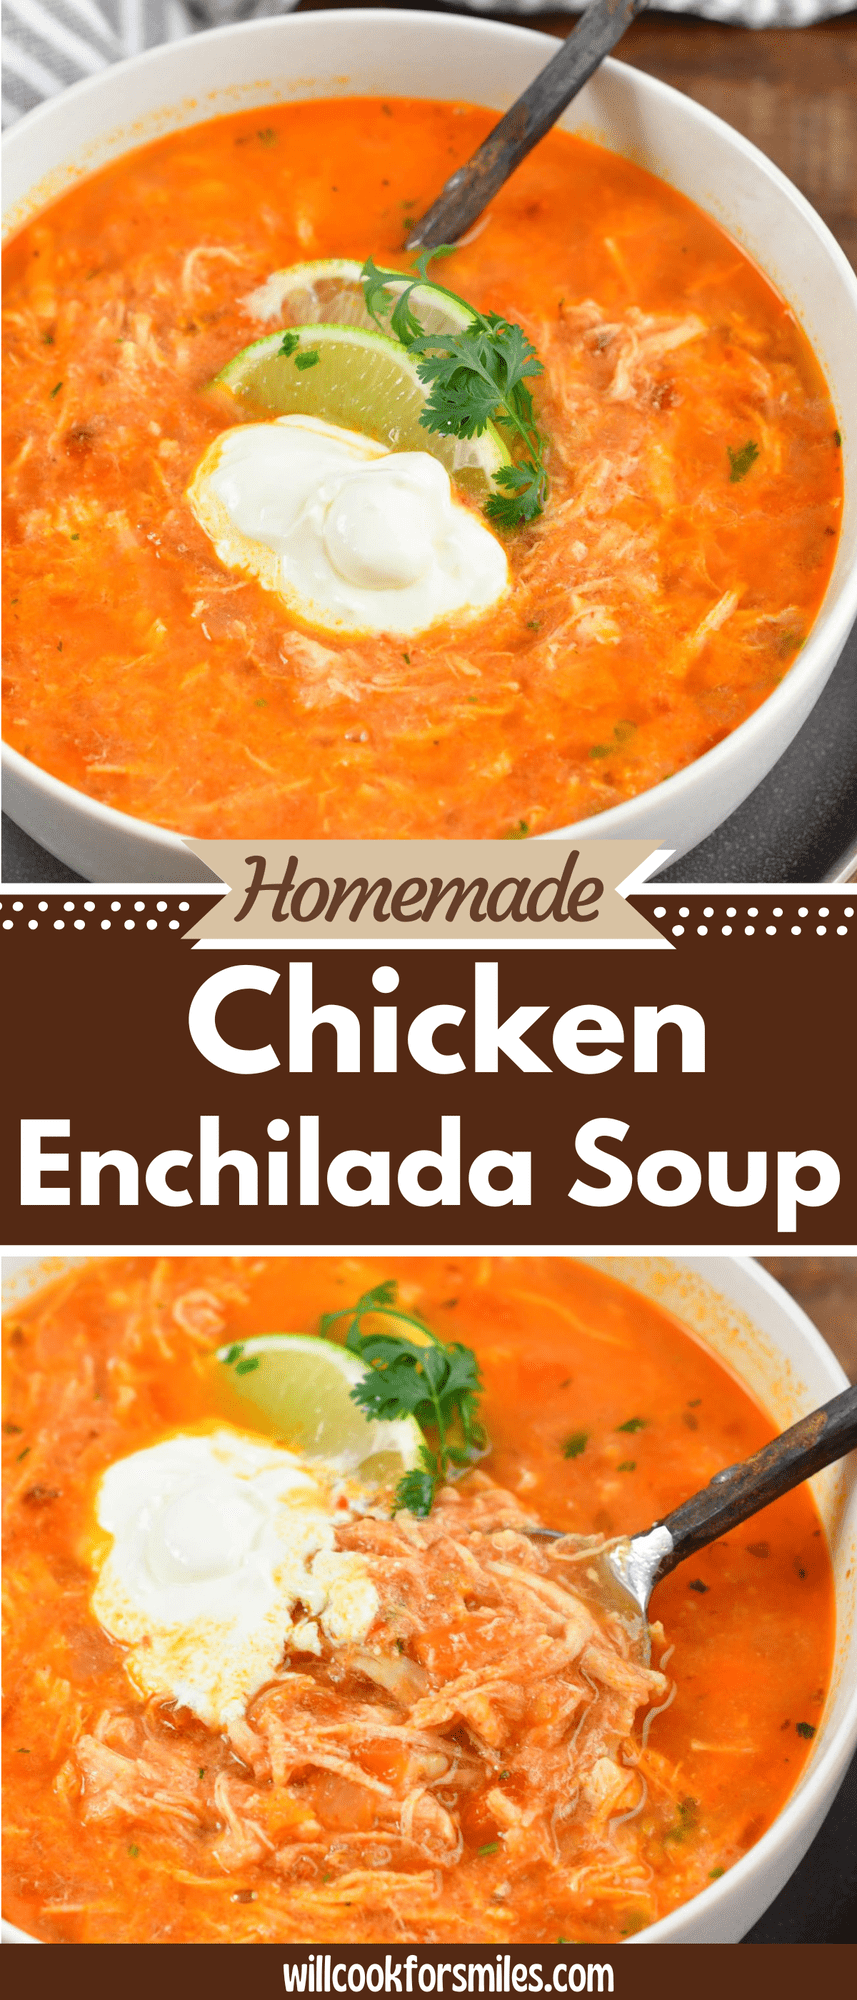 collage of two chicken enchilada soup images and title.